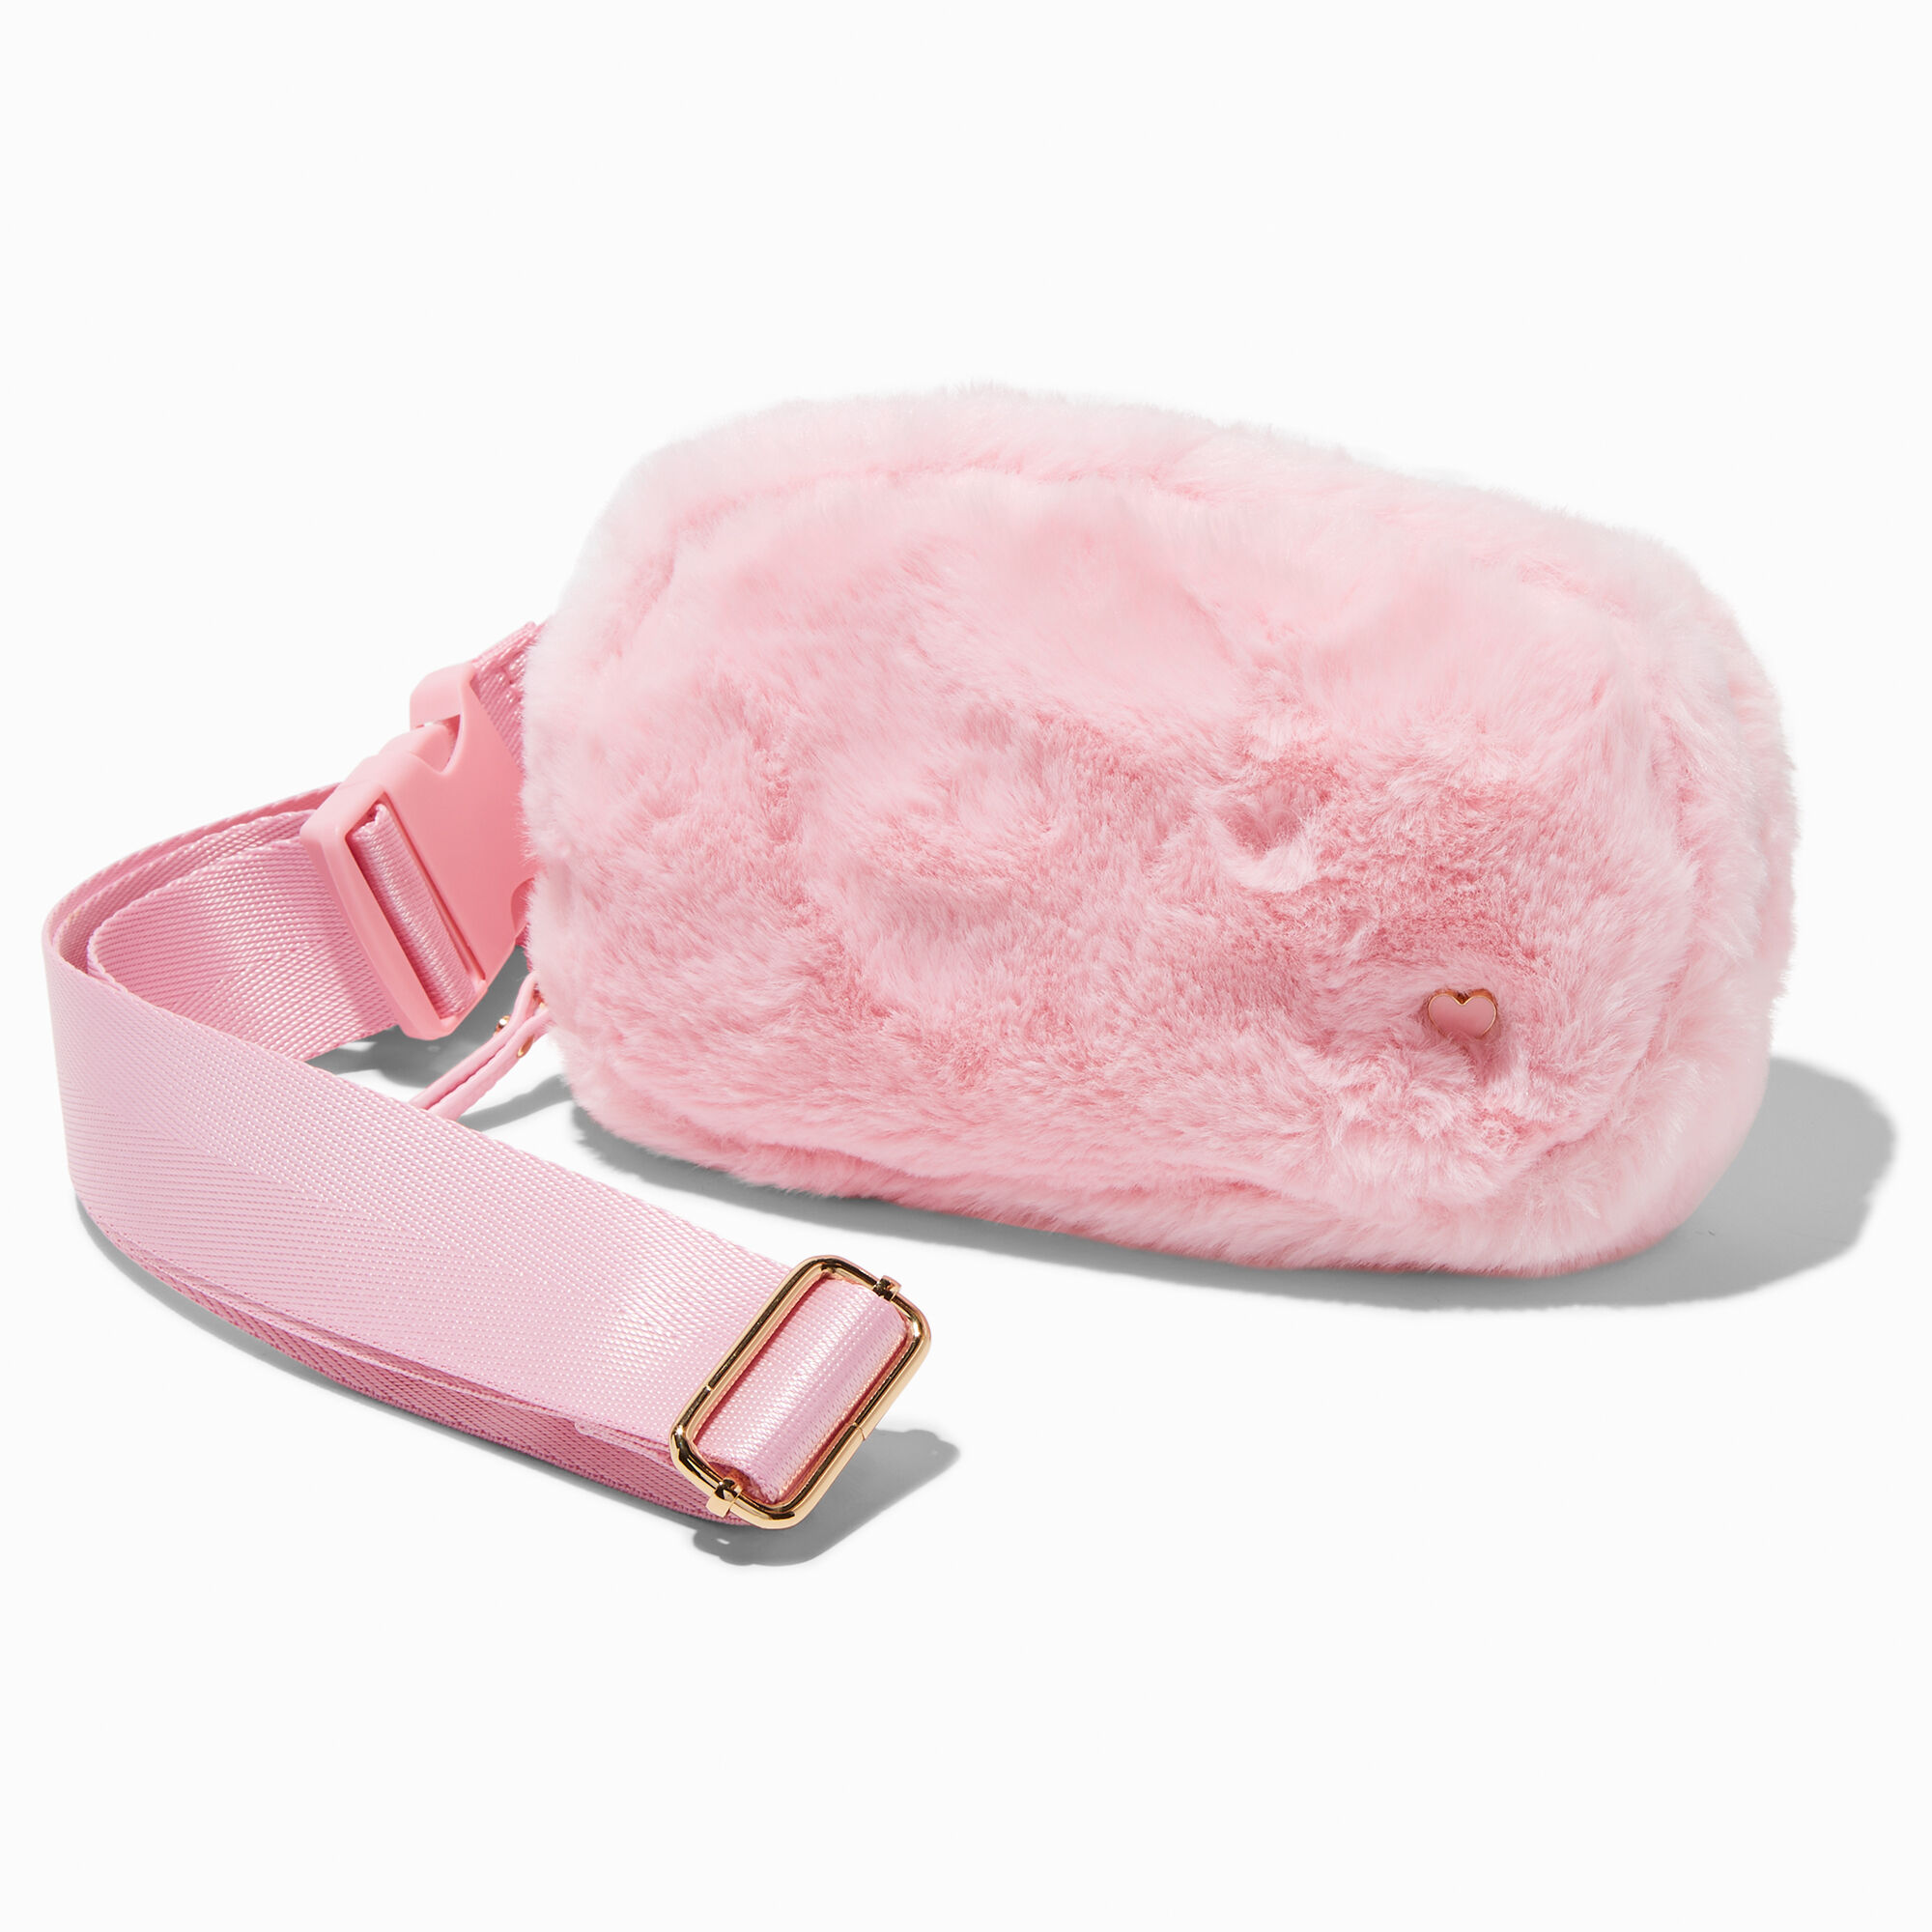 View Claires Blush Furry Bum Bag Pink information